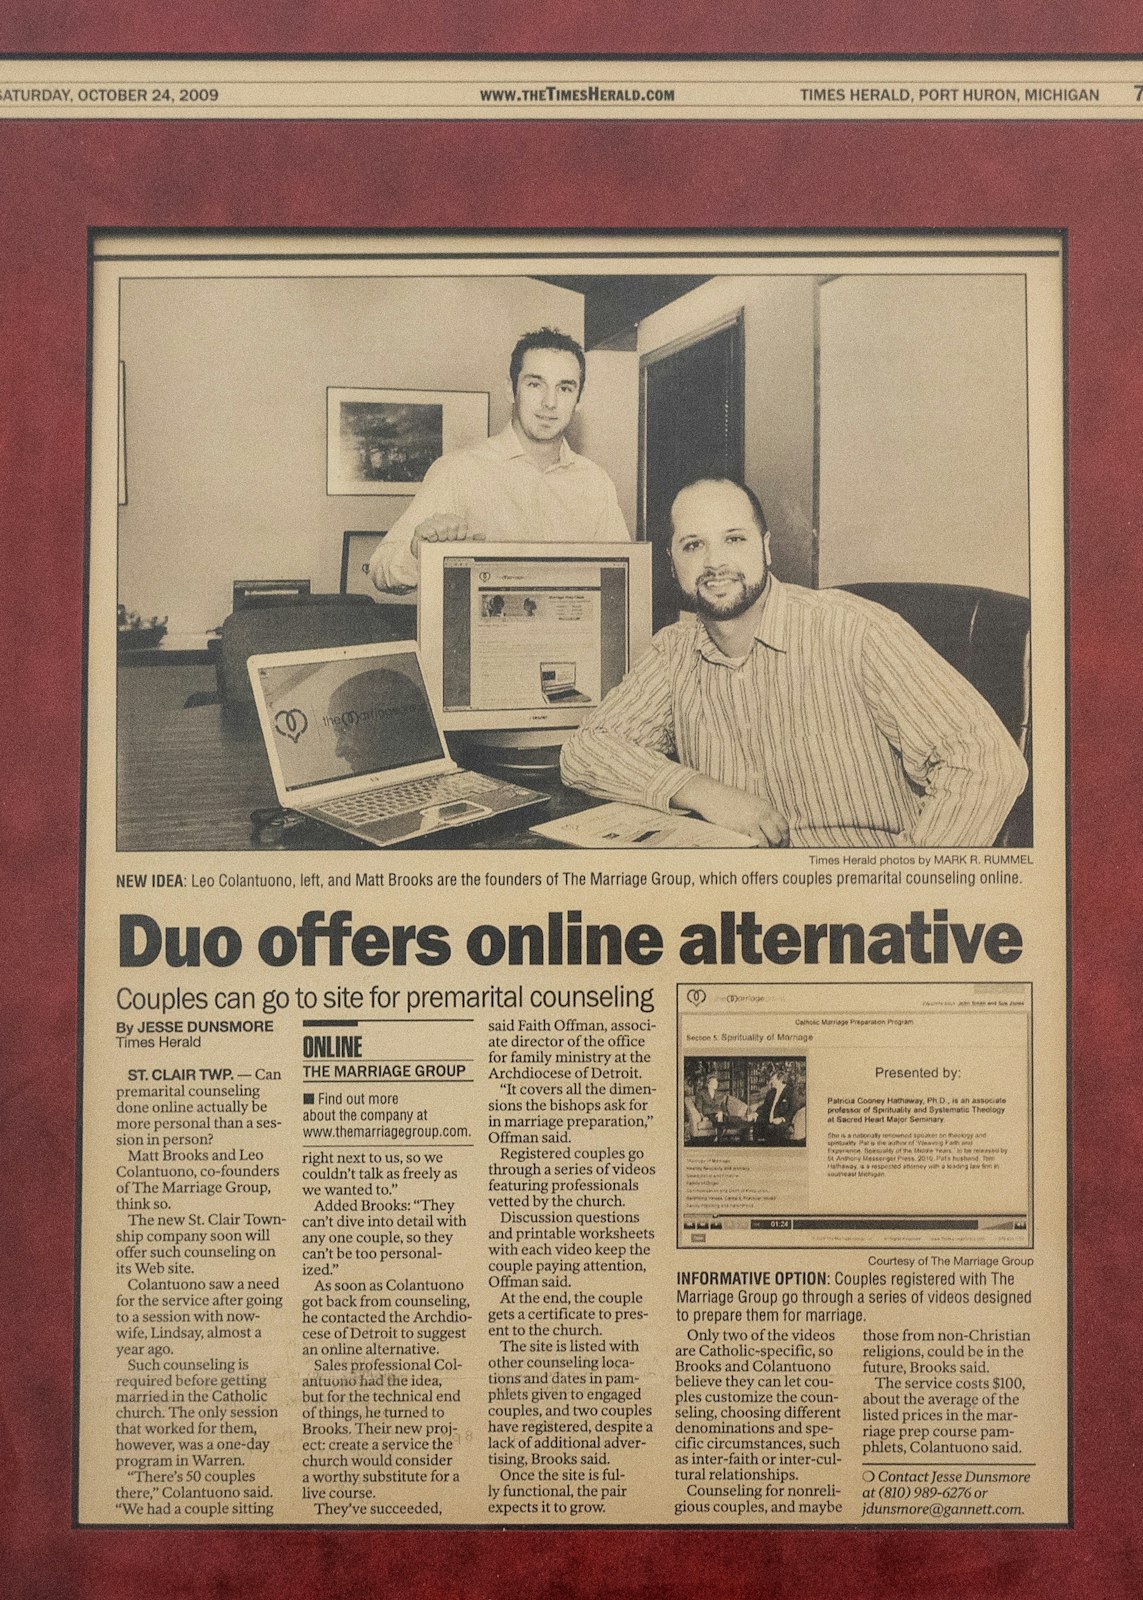 Newspaper clippings from the Port Huron Times Herald hang on the walls highlighting The Marriage Group's beginnings in 2009.